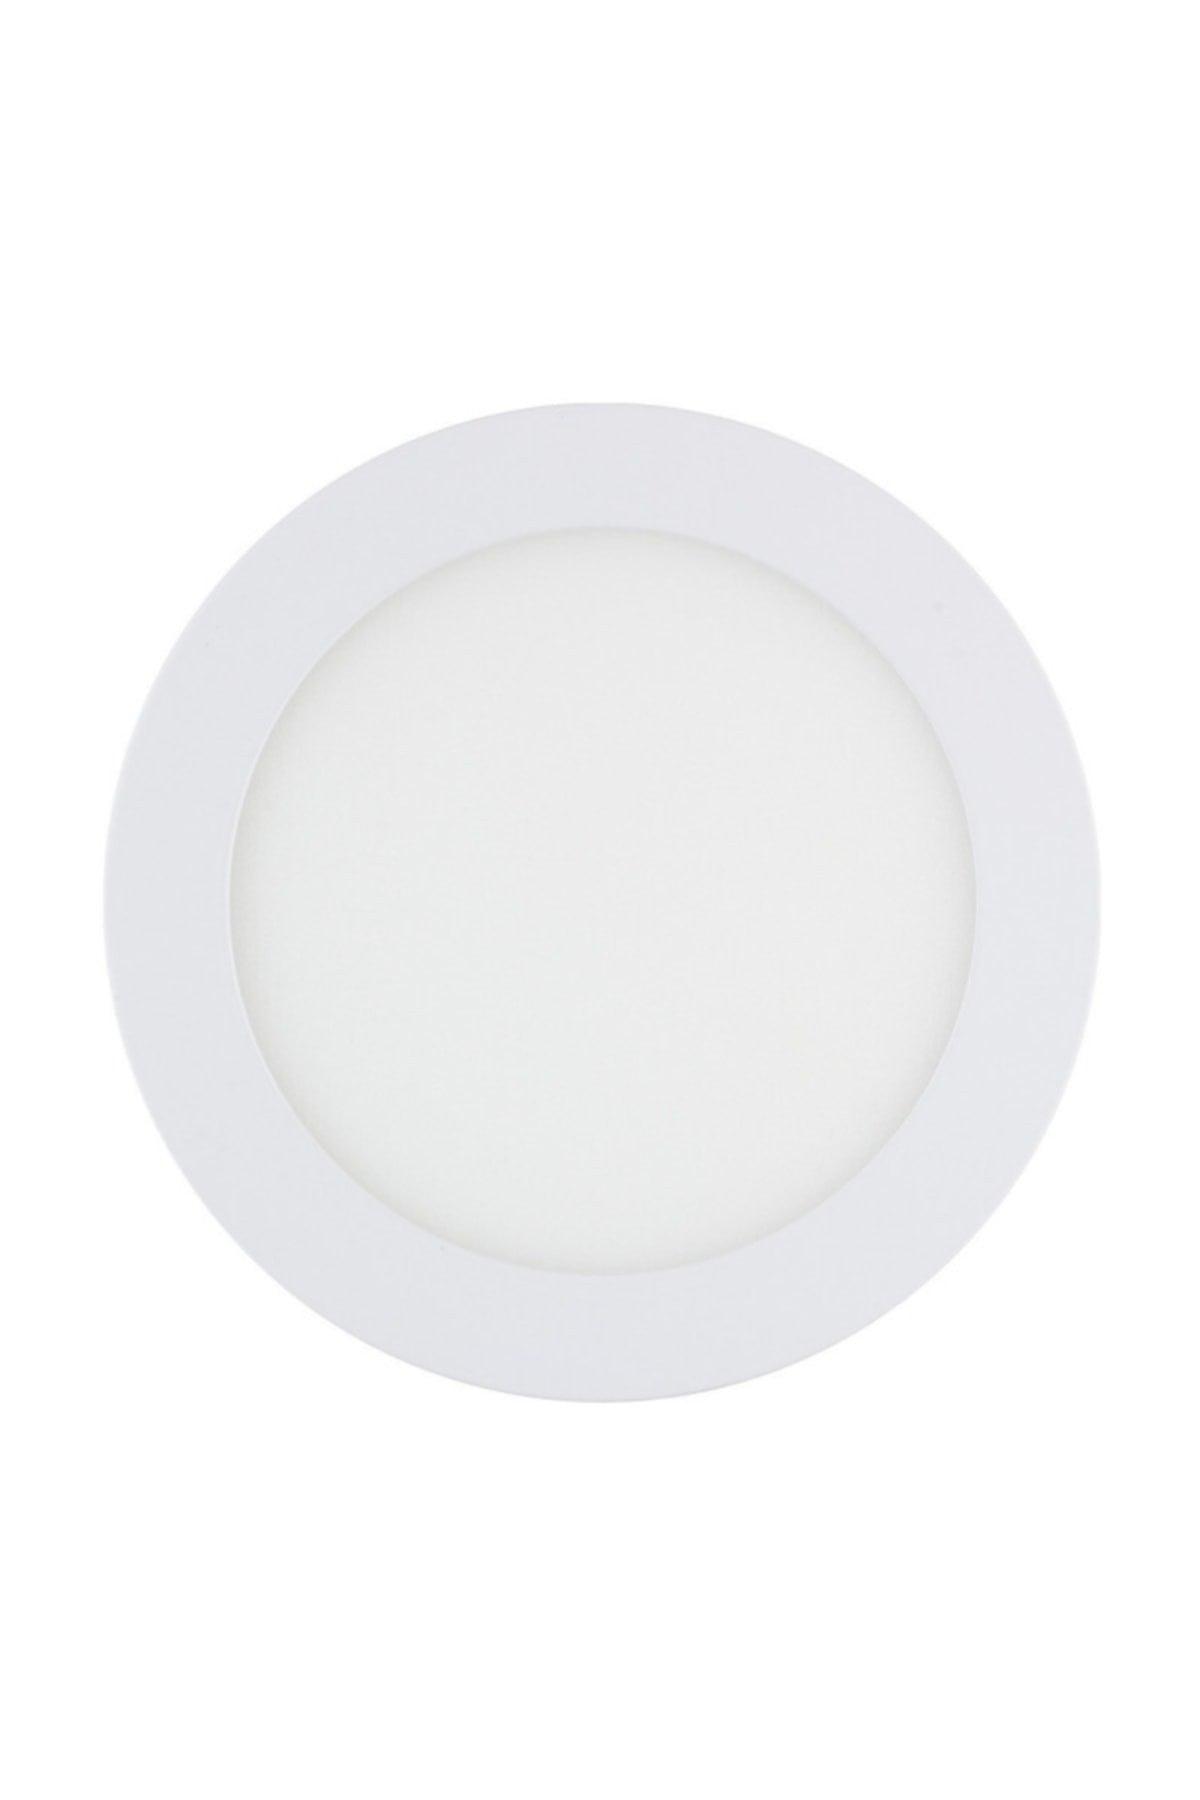 12w Recessed Led Panel Deluxe White(5pcs)